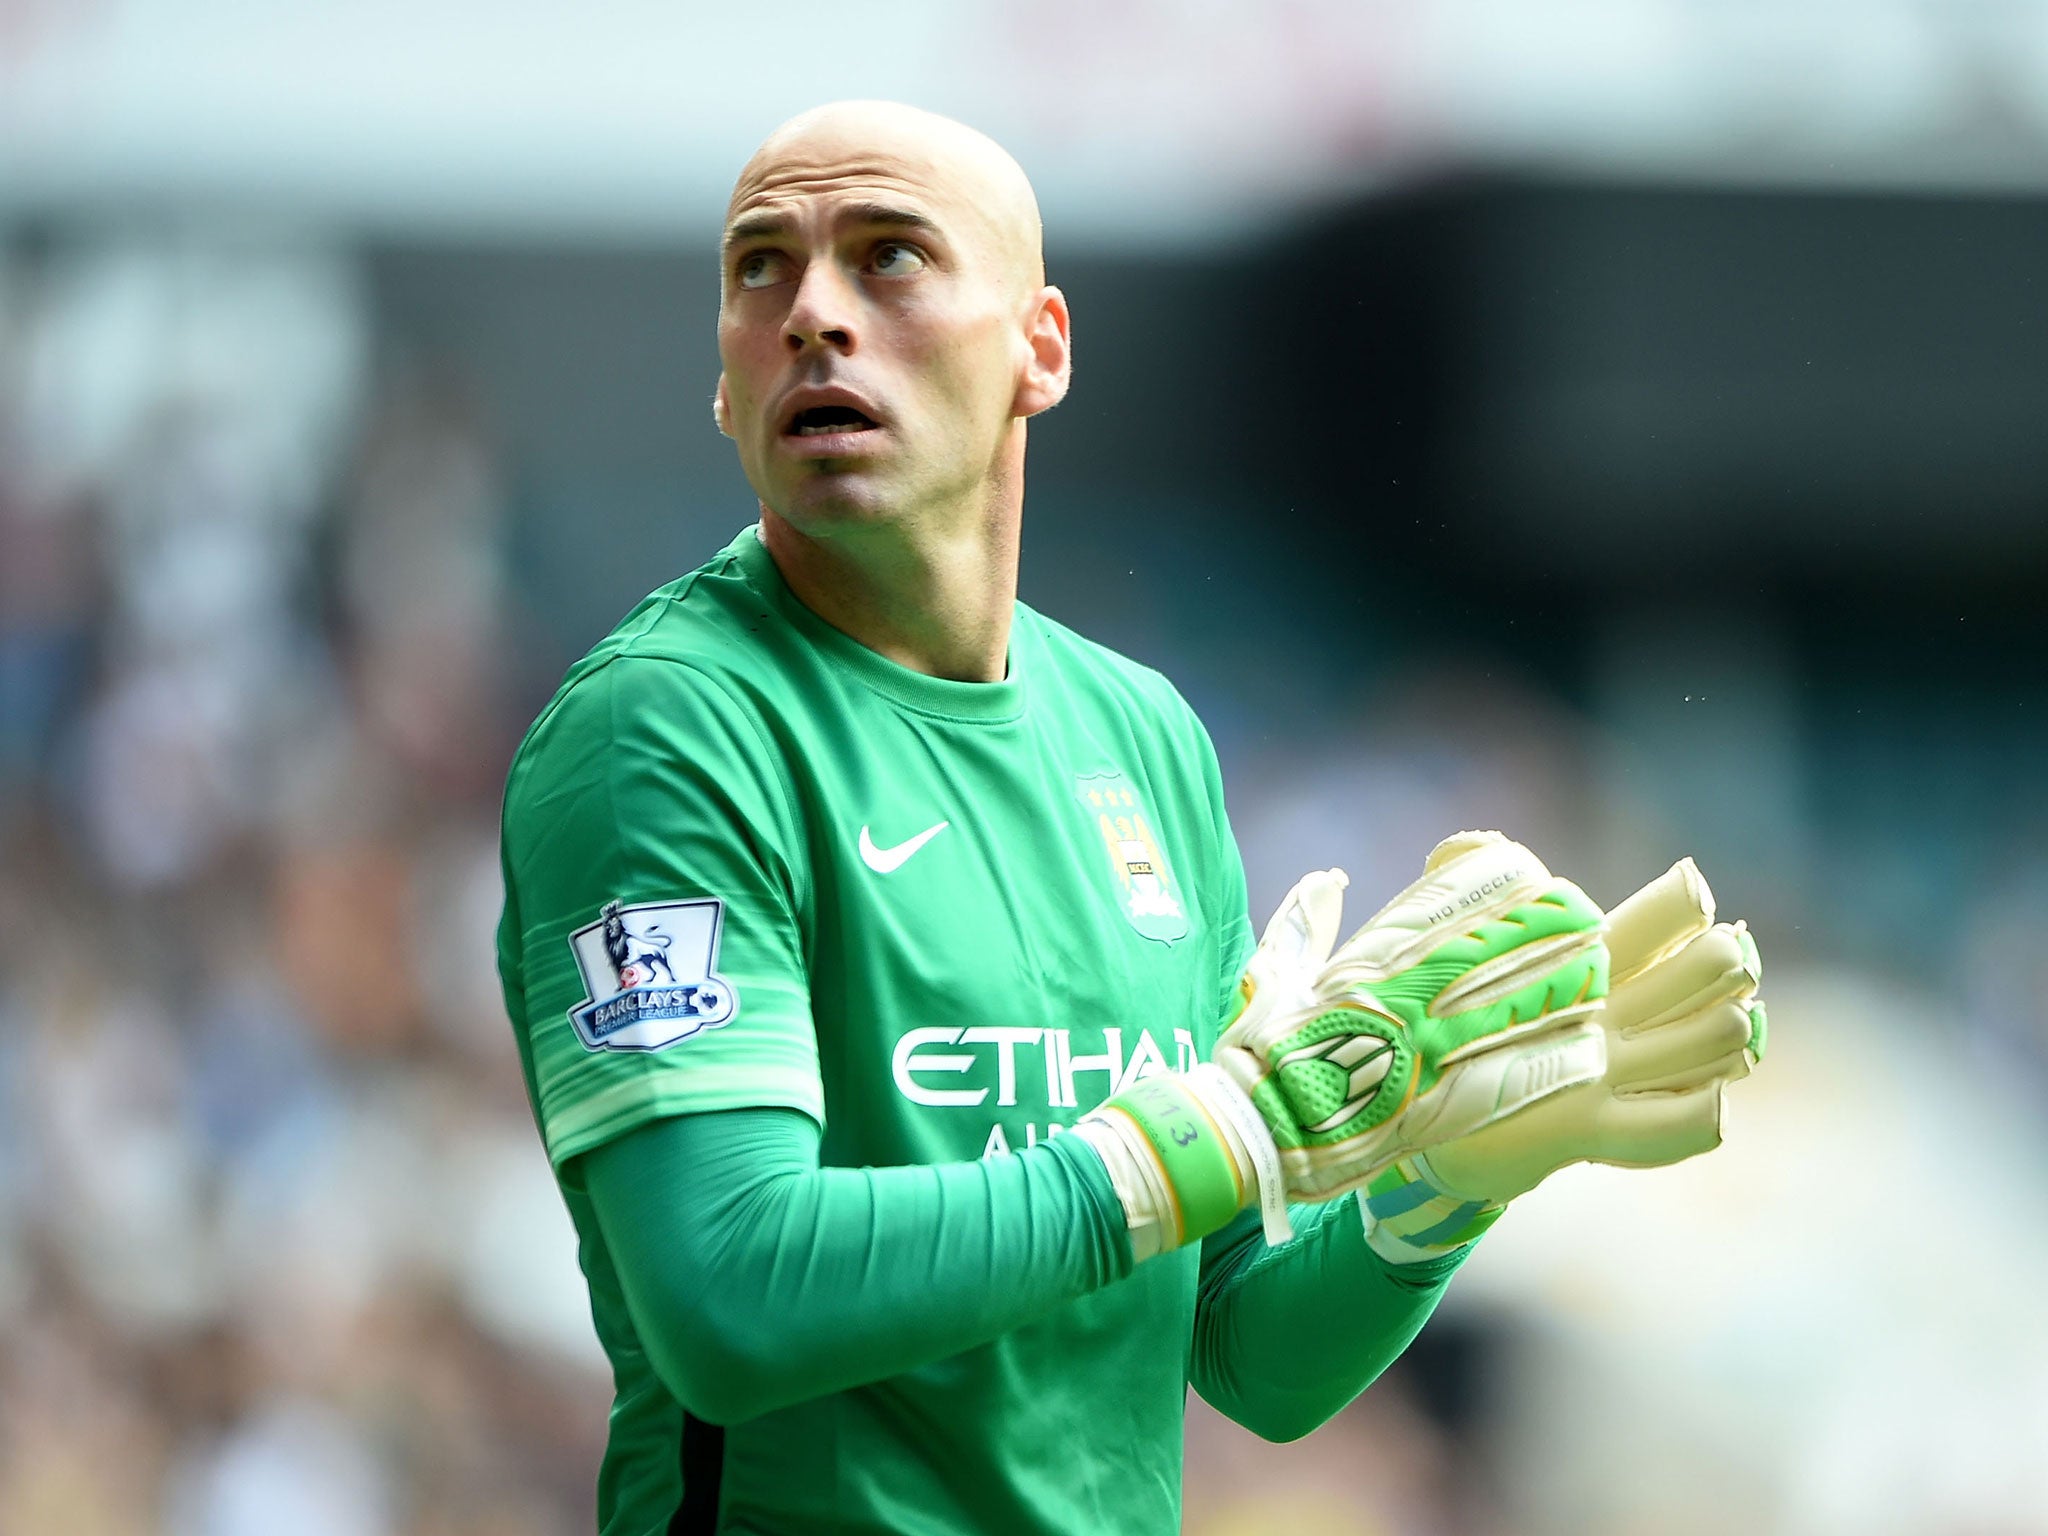 Willy Caballero starts for Manchester City for the first time since September